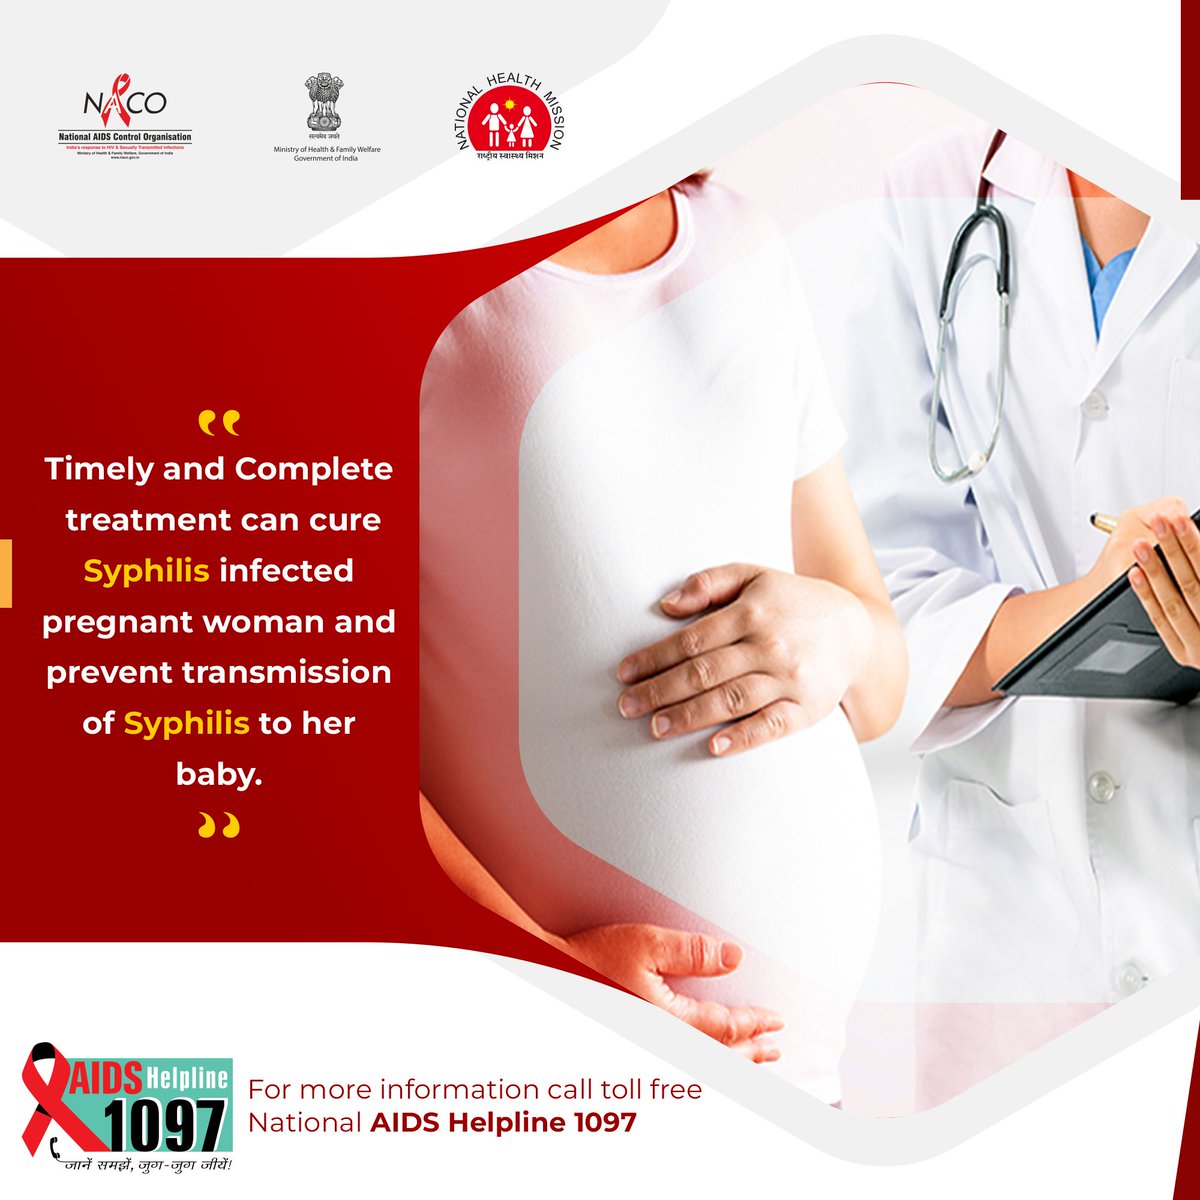 Timey and complete treatment can cure #Syphilis infected pregnant woman and prevent transmission of Syphilis to her baby.
 
#SyphilisPrevention #SyphilisIsCurable #SyphilisTreatment #IndiaFightsHIVandSTI #LetCommunitiesLead #NACOApp #dial1097 #HIV #AIDS #goasacs